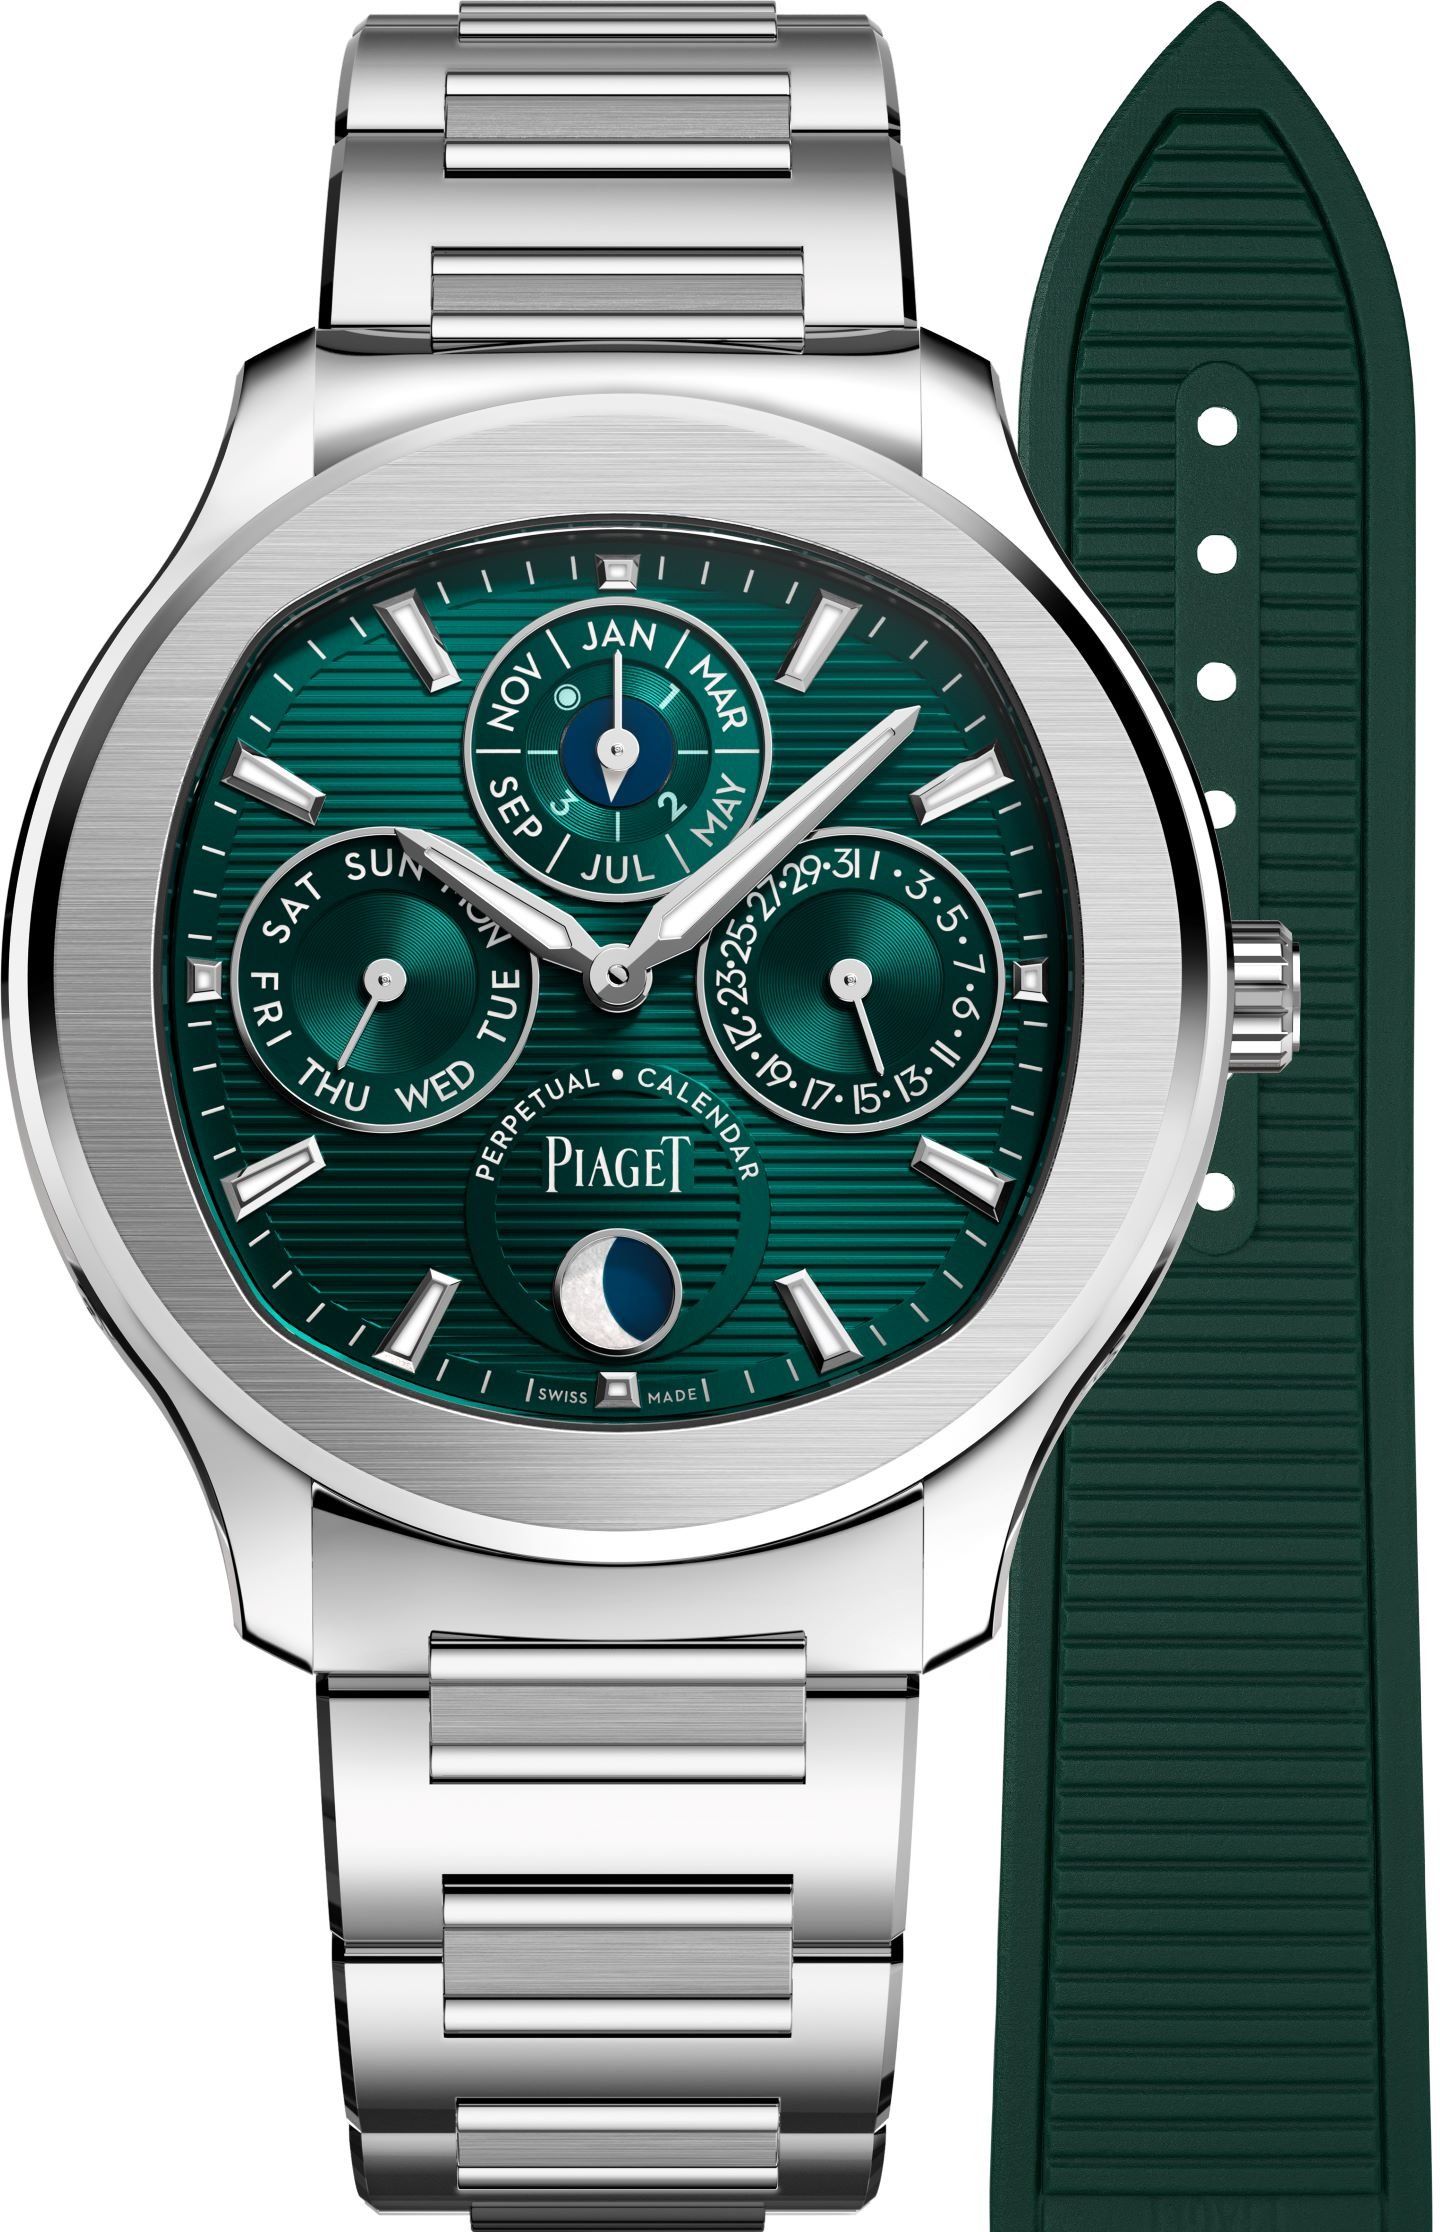 The Piaget Polo Ultra-Thin Perpetual Calendar In Solid Green